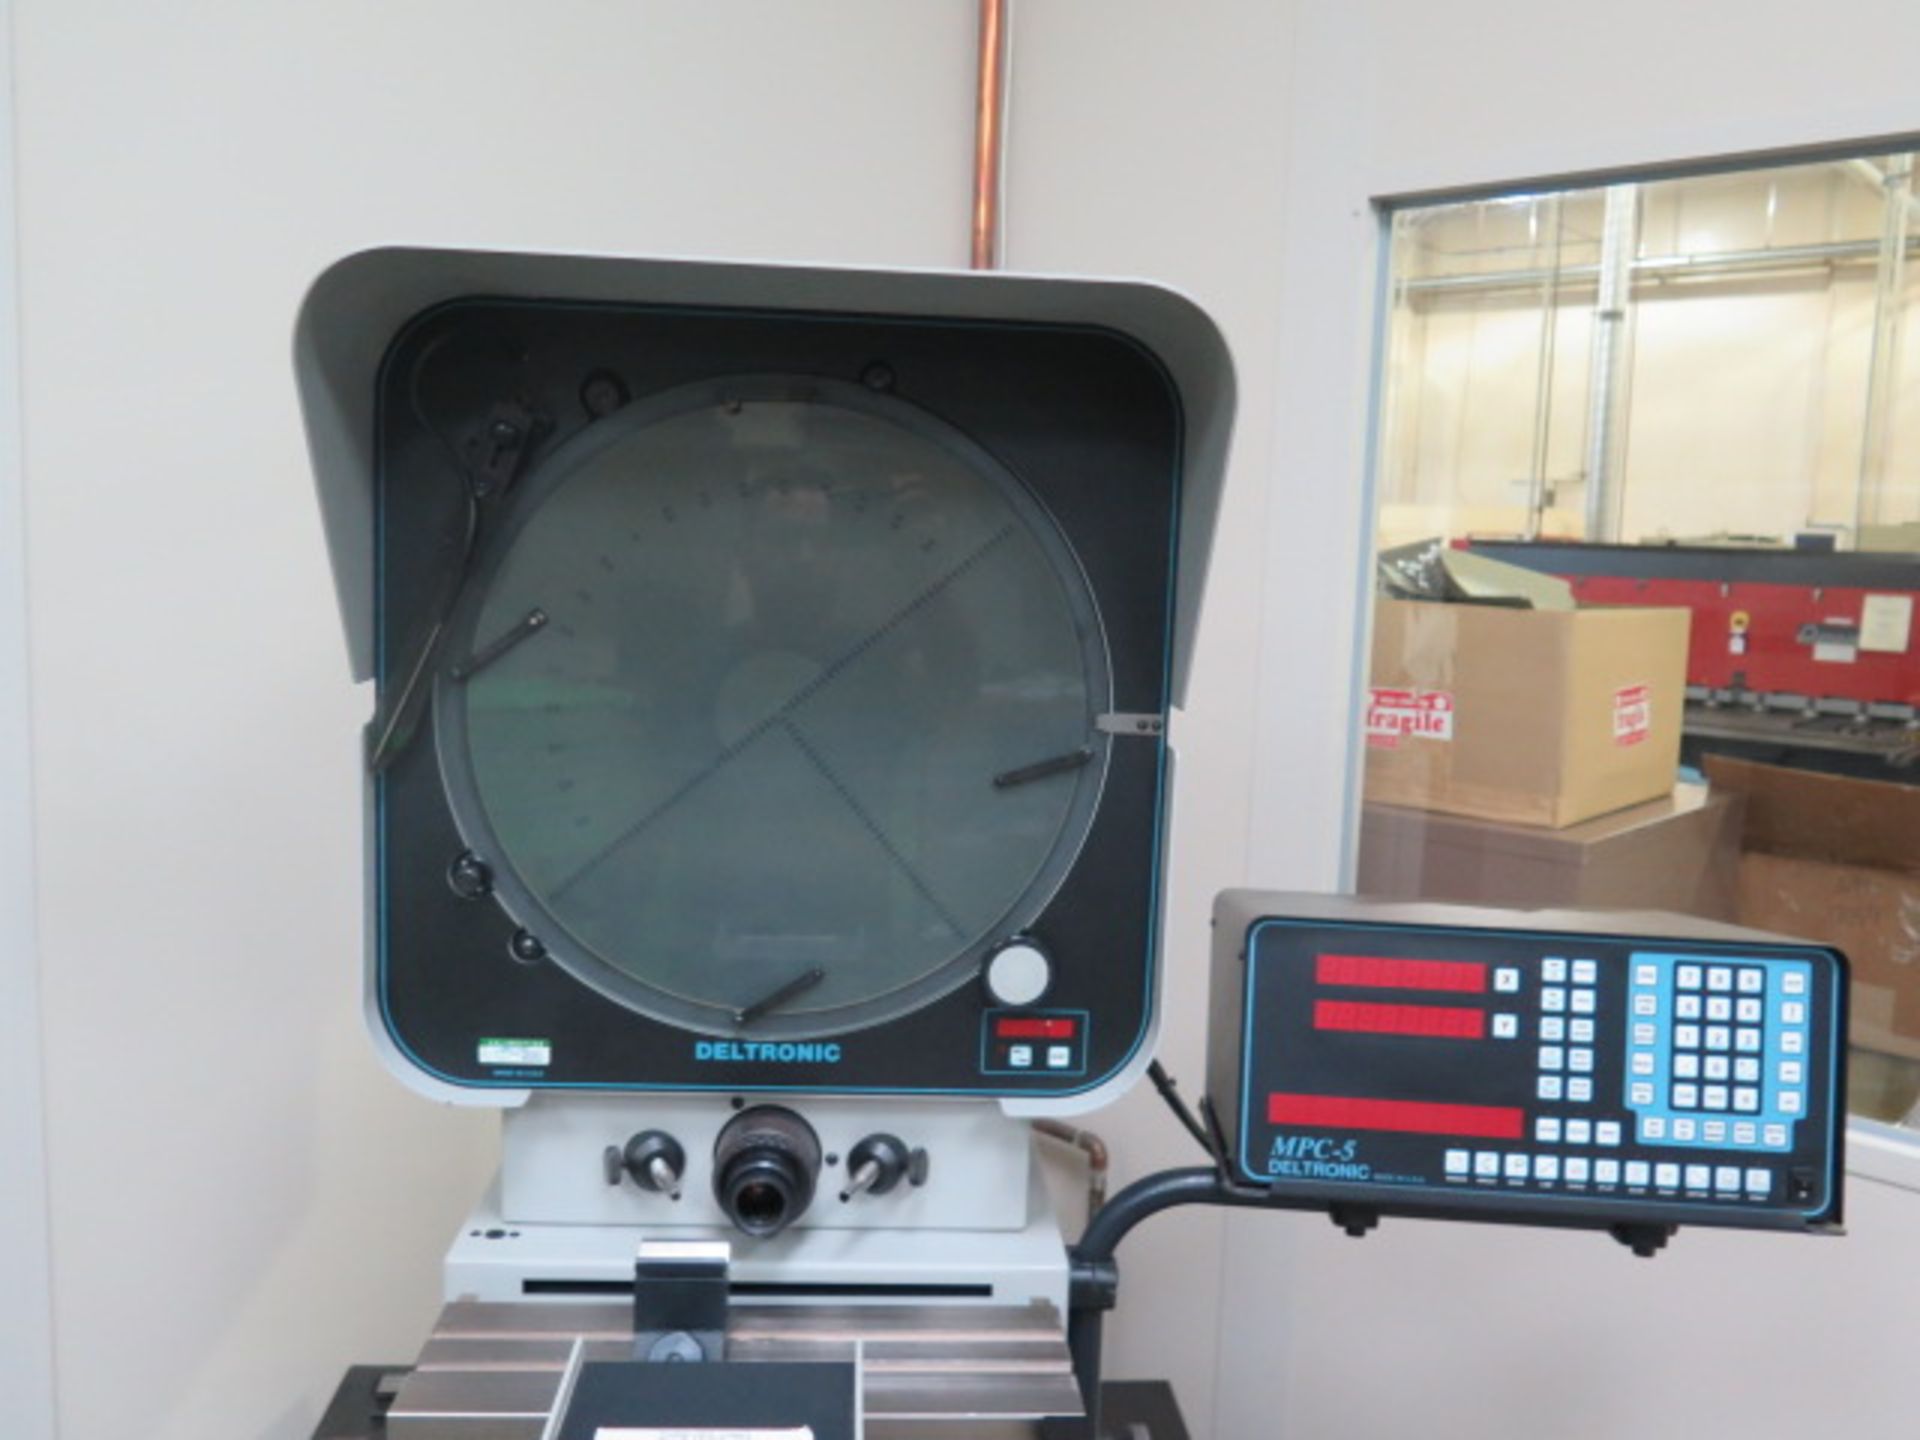 Deltronic DH216-MPC5 15” Optical Comparator s/n 389045807 w/ MPC-5 Programmable DRO, SOLD AS IS - Image 4 of 13